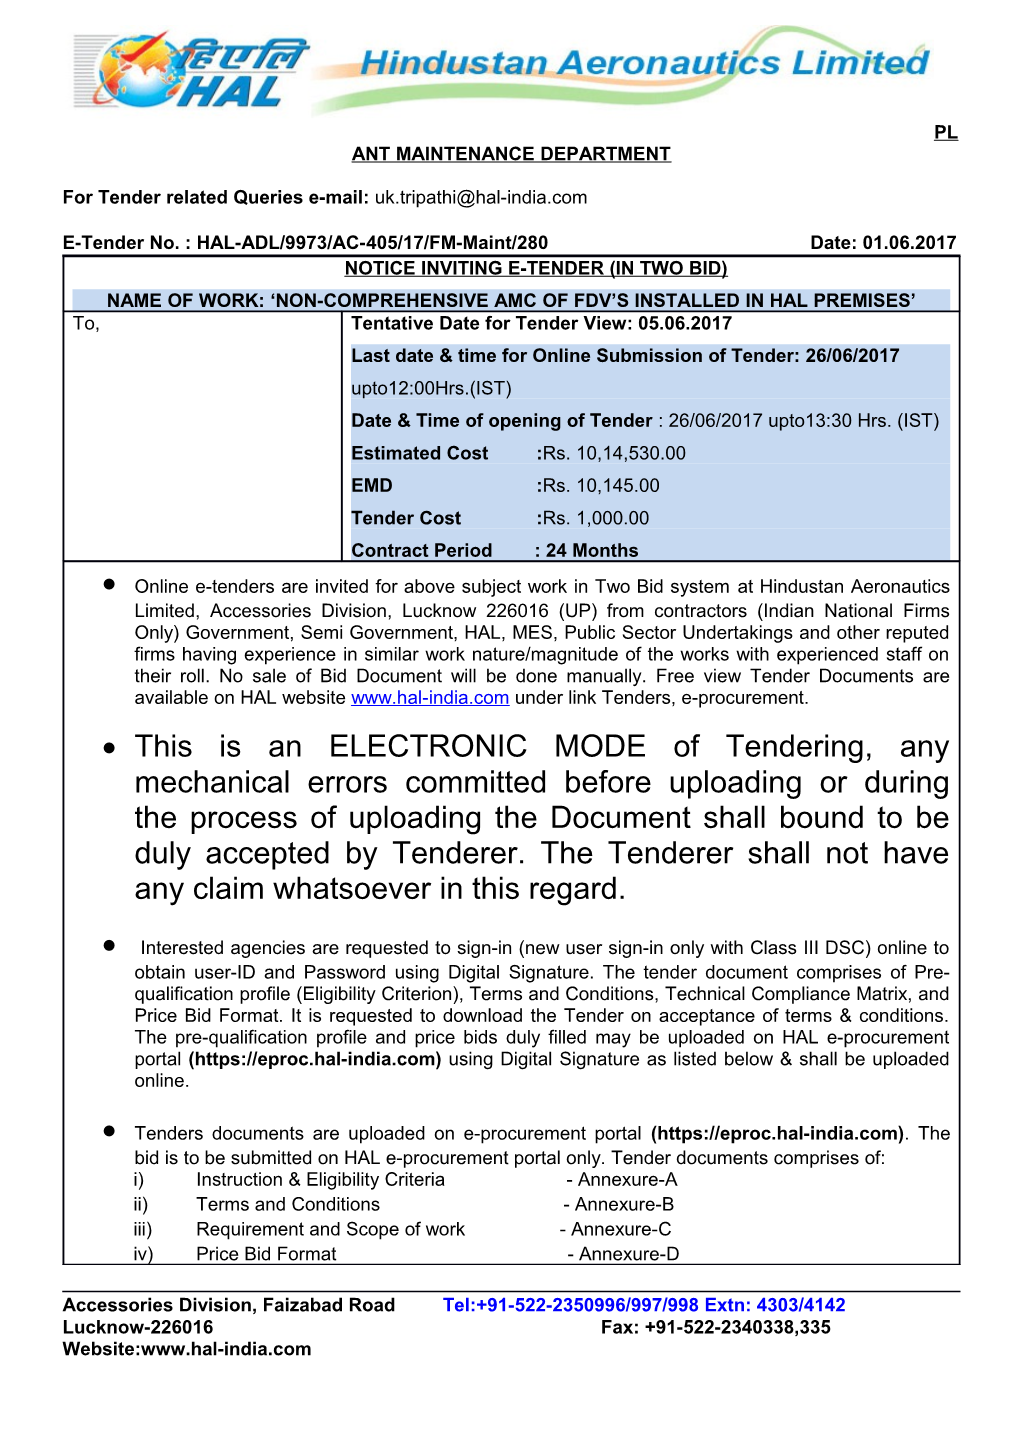 For Tender Related Queries E-Mail